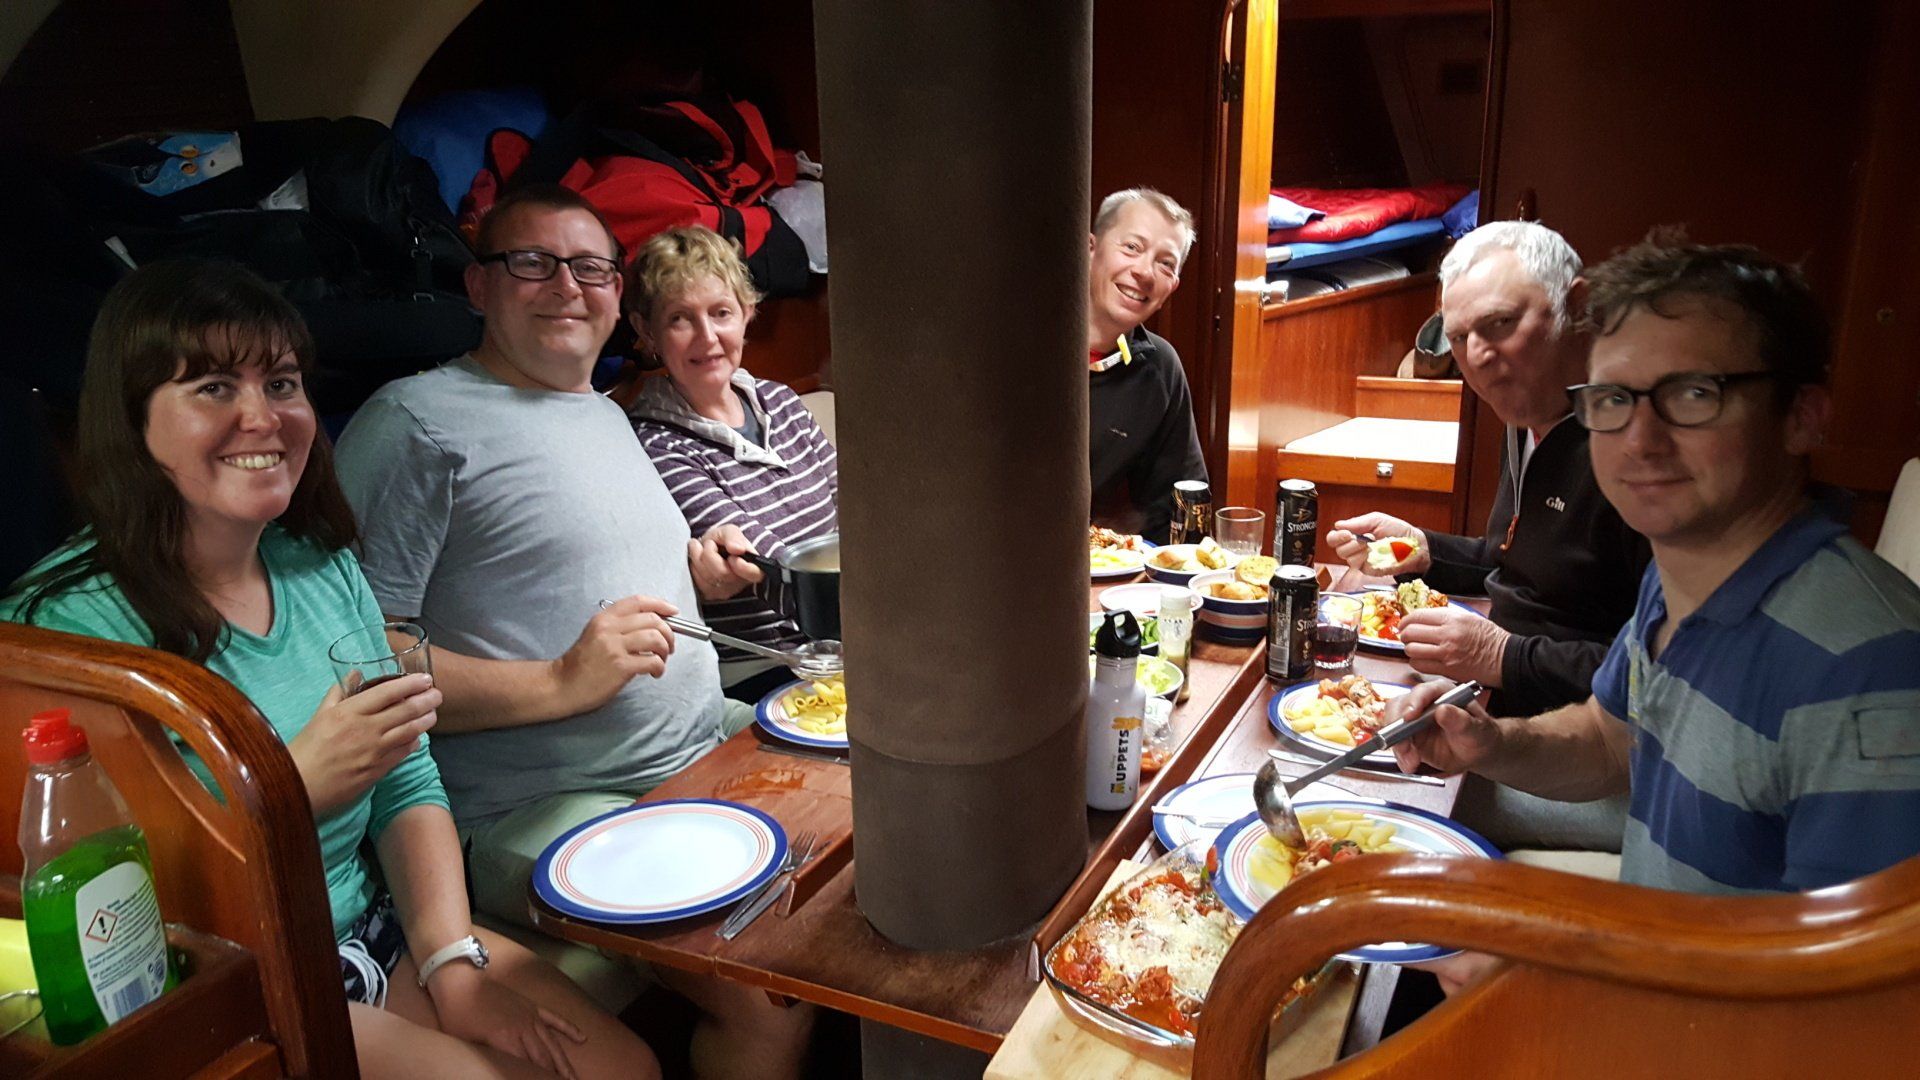 A group of sighted and visually-impaired sailors are sitting around the table below decks, which is set with a meal of pasta, breads and sauces. Everyone is smiling and having fun. The man nearest to the camera is serving some of the food.